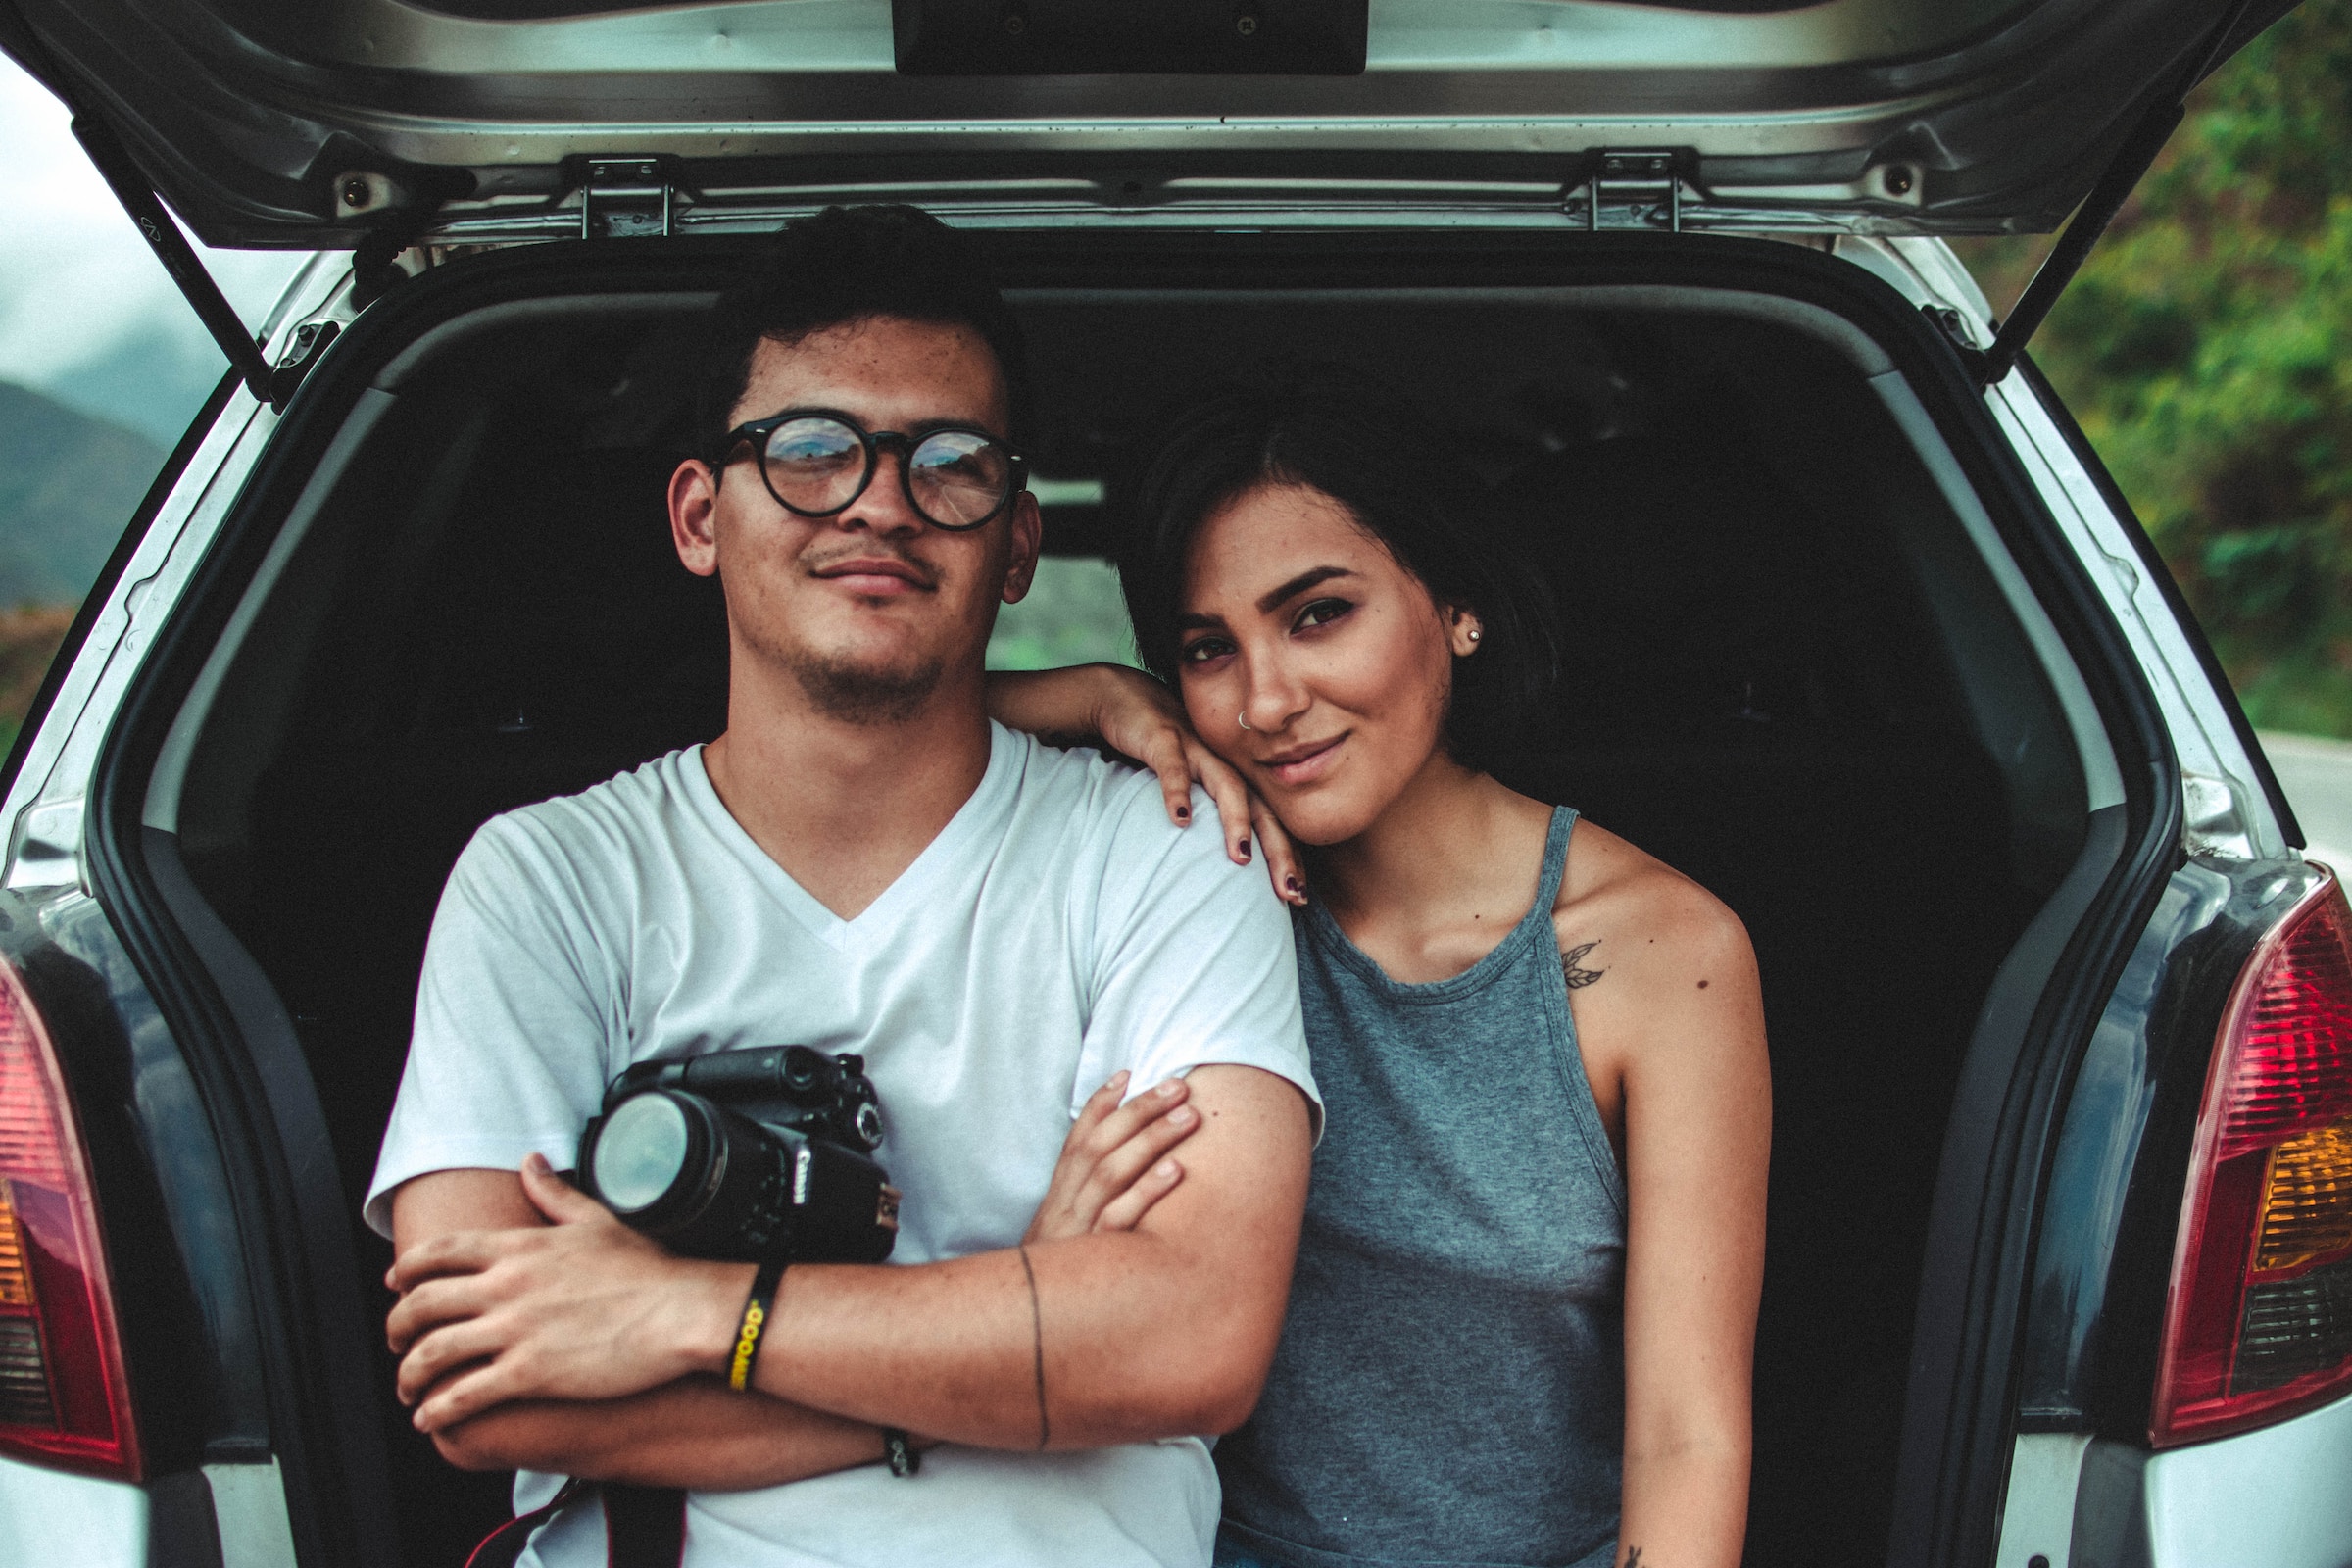 A couple leaning on the back of their vehicle holding a camera